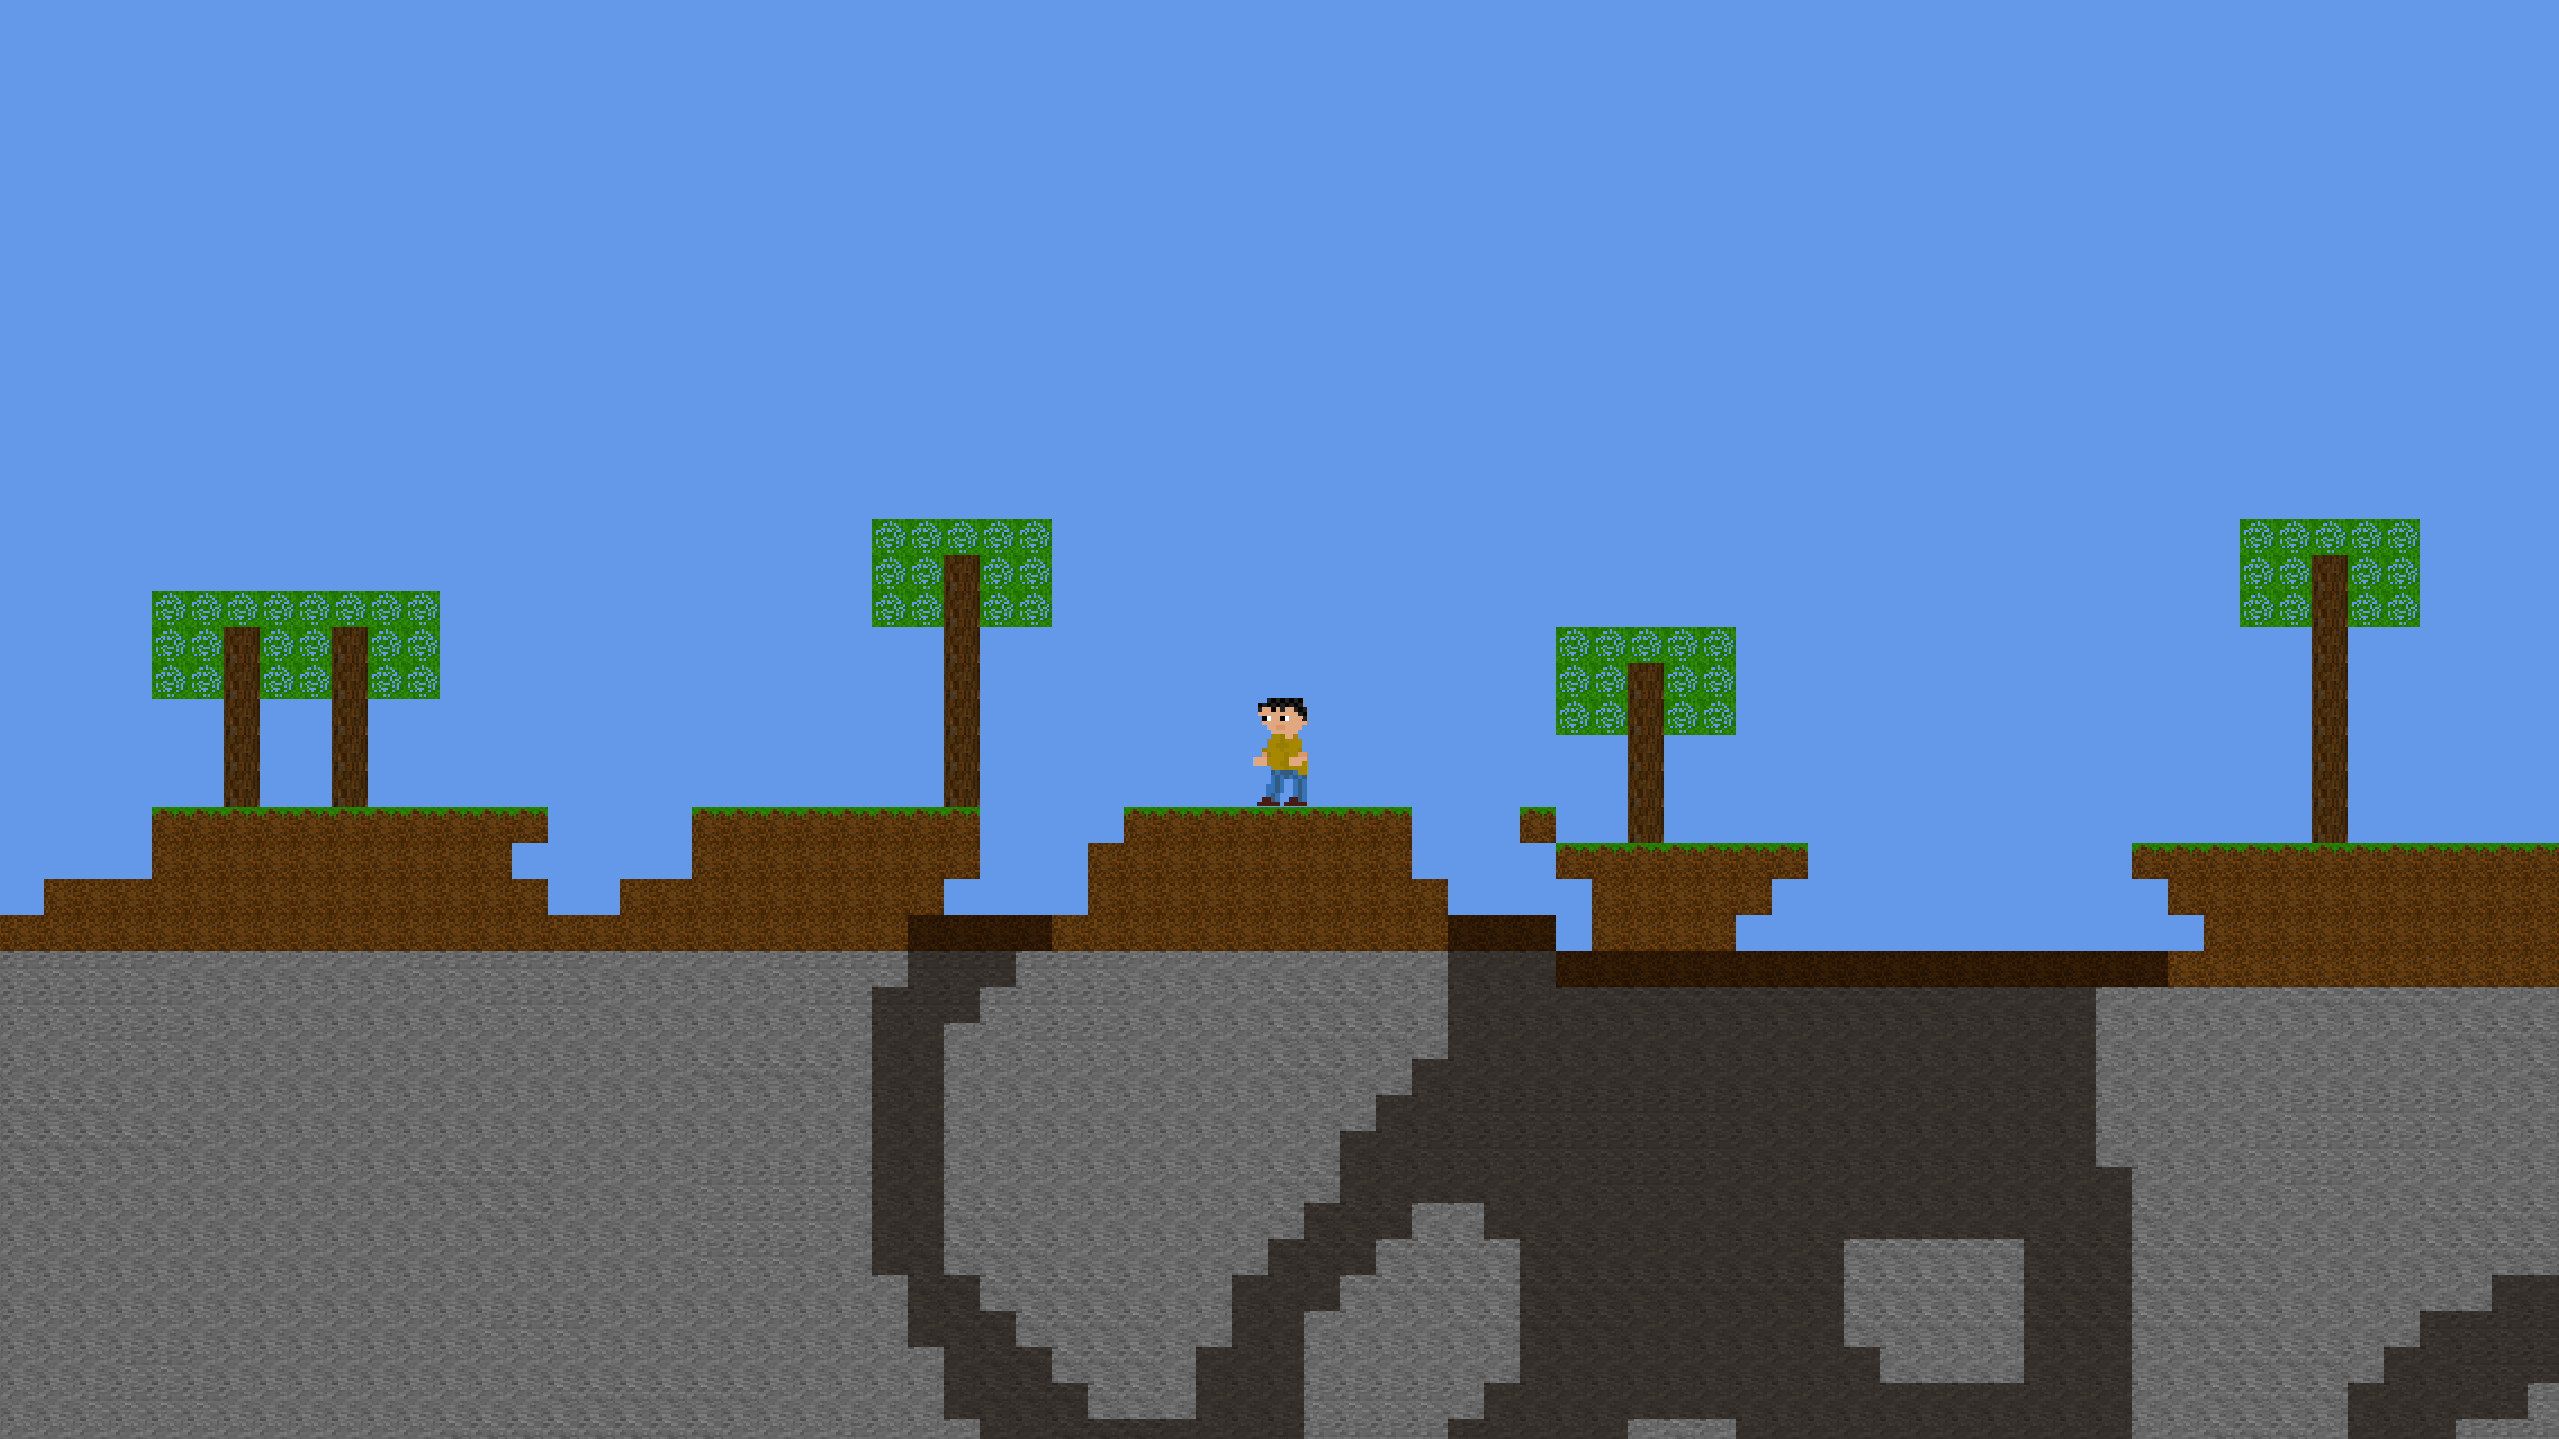 Player standing on grass with big cave hole in the ground on the left, and some treas nearby